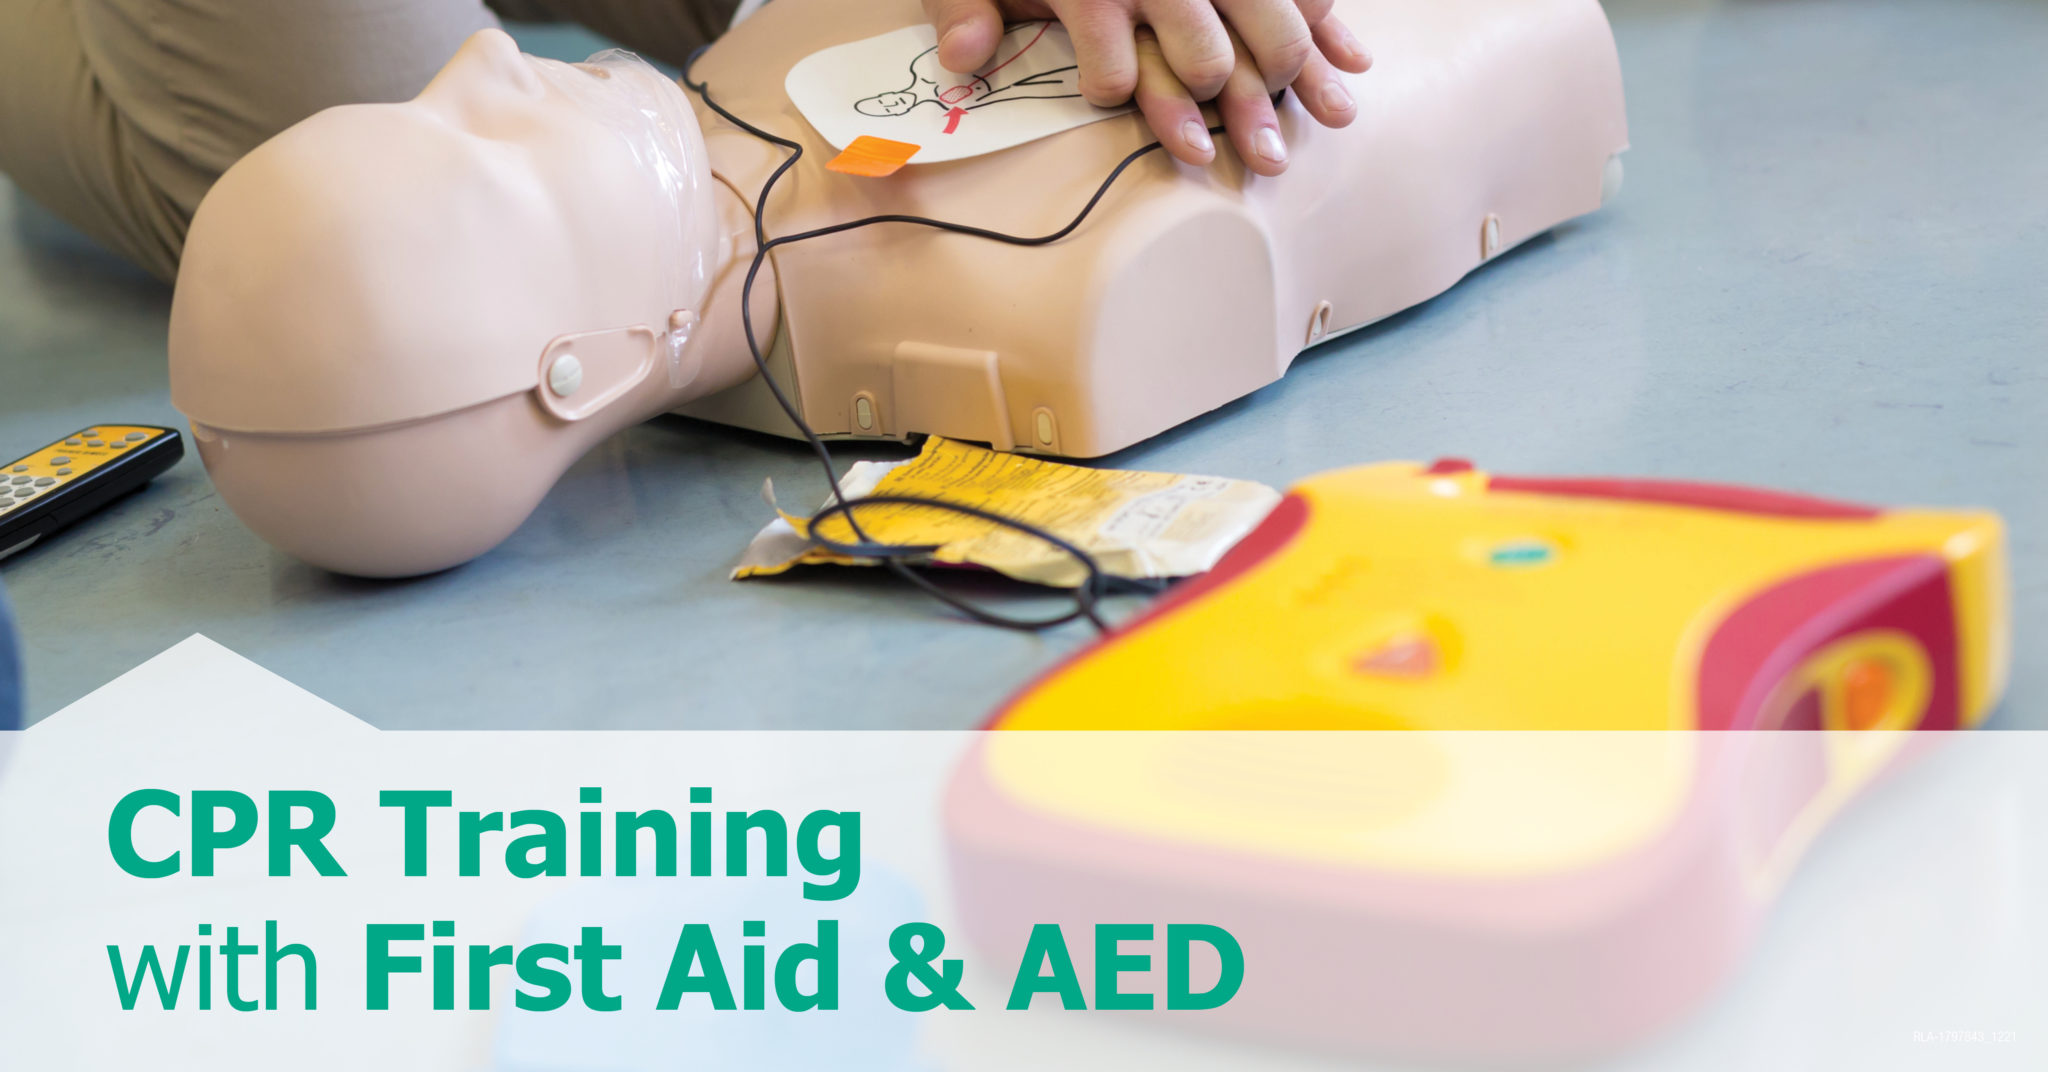 CPR Training with First Aid & AED